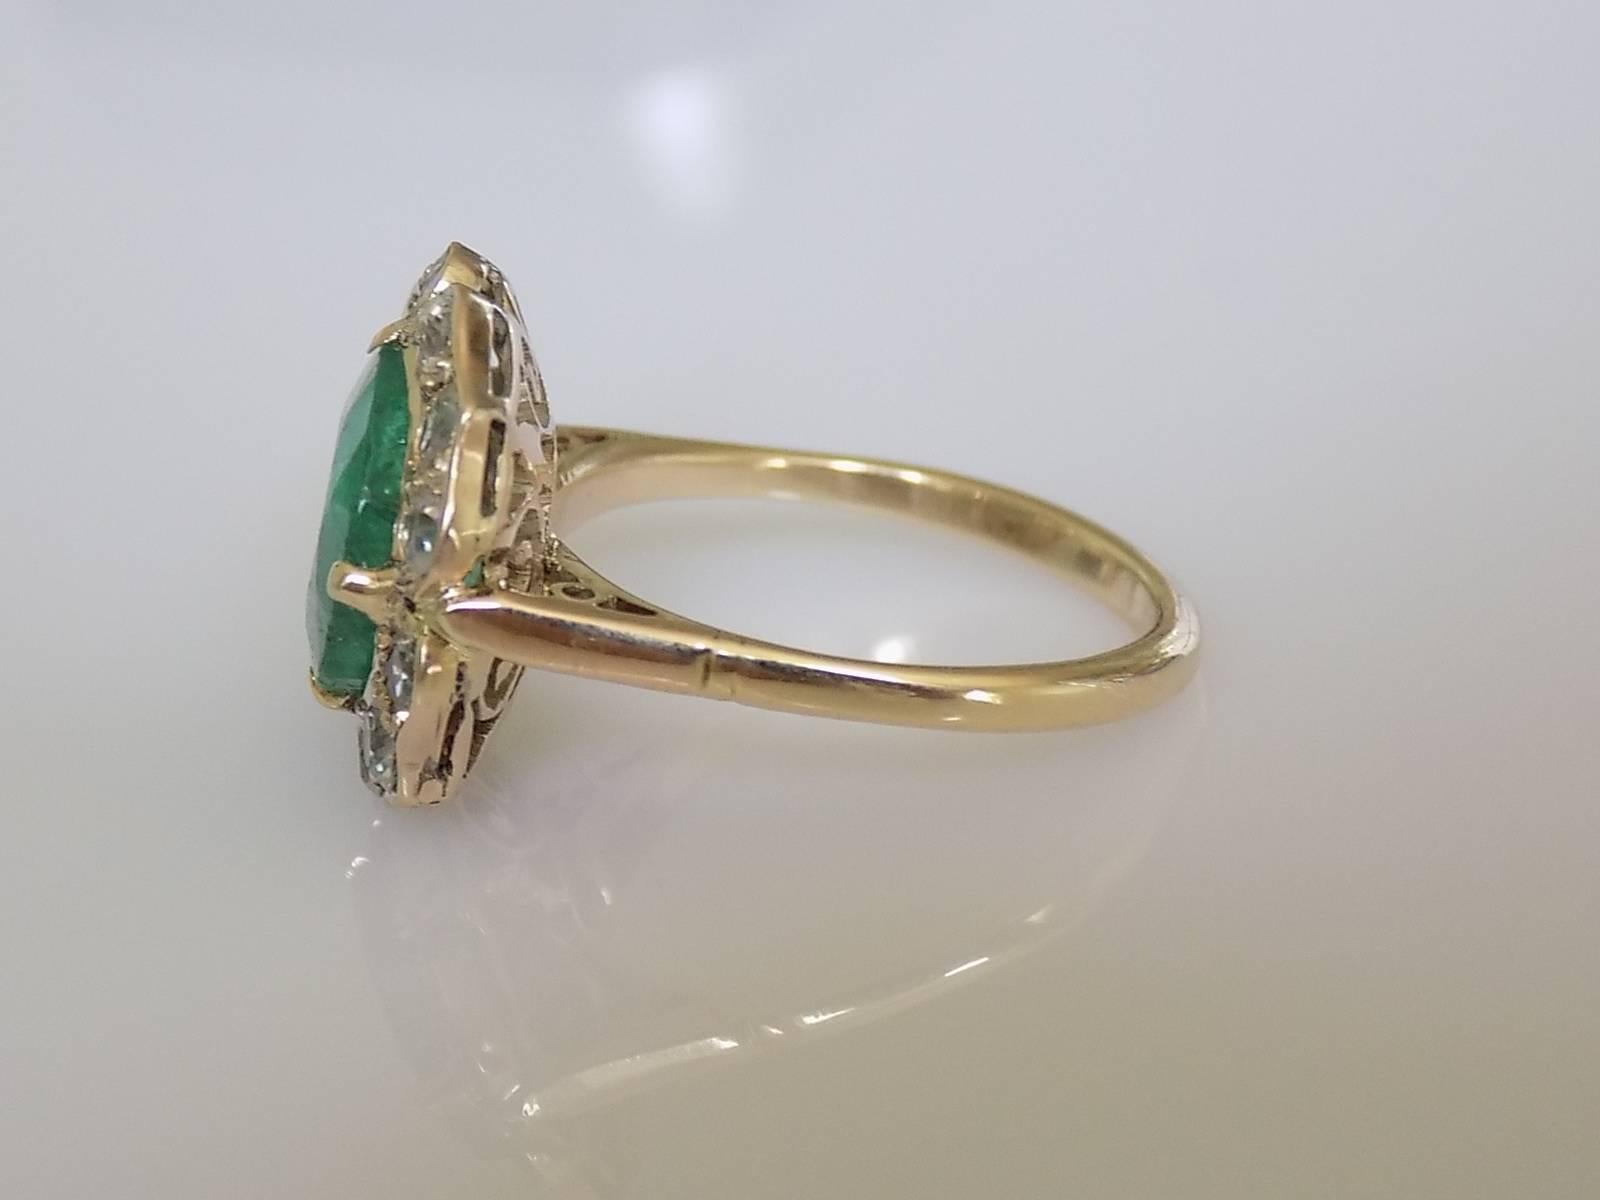 An Outstanding Victorian c.1890-1900 Yellow Gold and Impressive 3 Carat Natural Emerald ring. Emerald surrounded by hand cut white Zircons in Gorgeous Flower shaped setting. Looks Spectacular when worn. English origin.

Size N 1/2 UK, 7.25